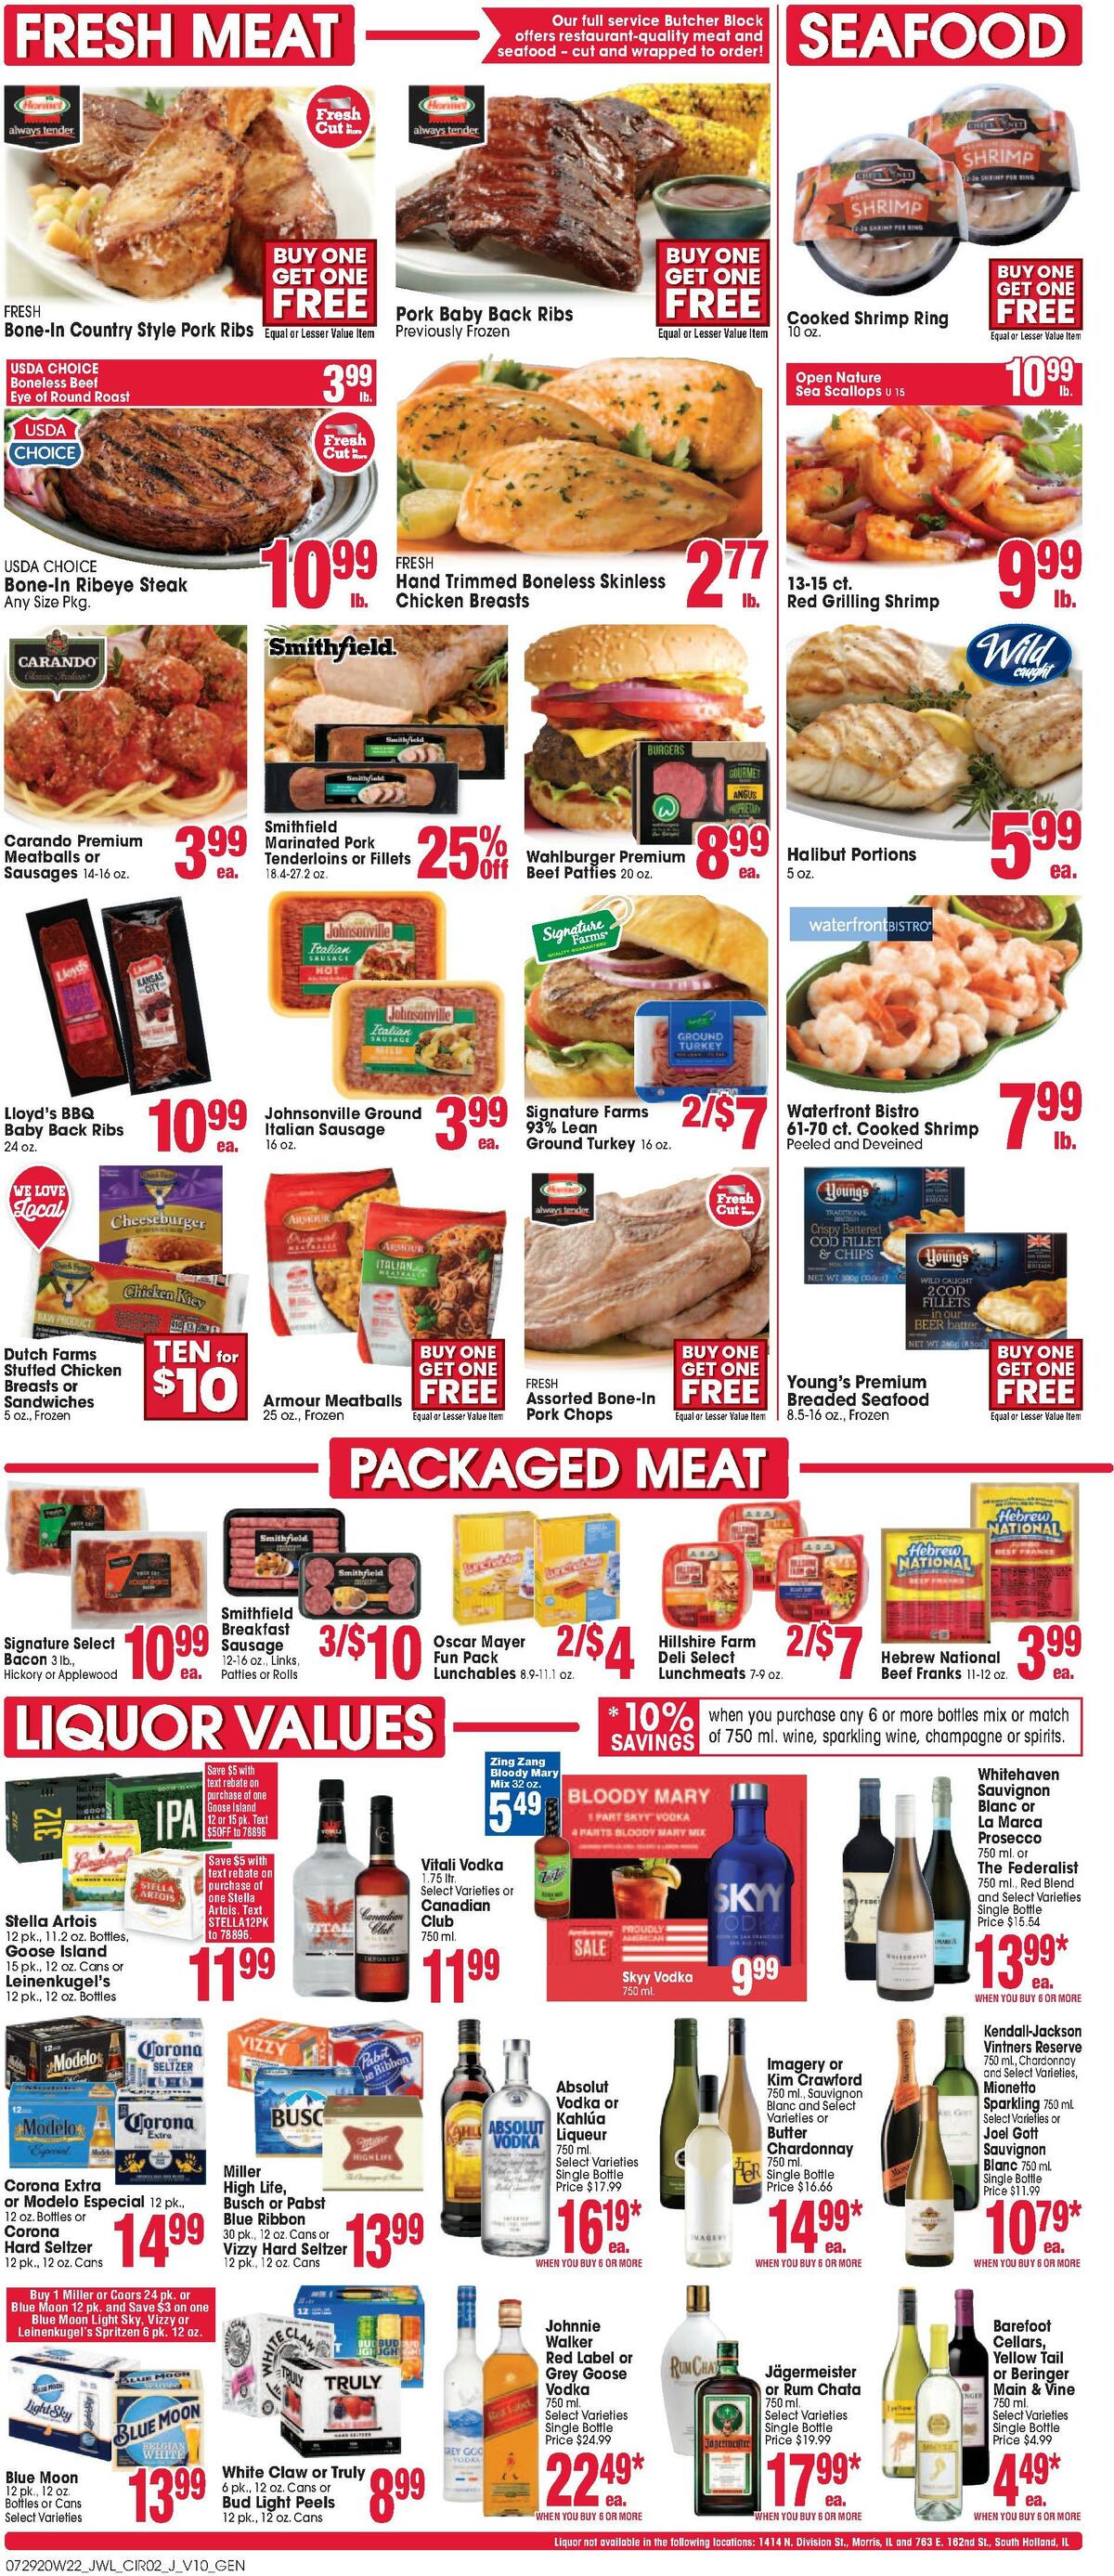 Jewel Osco Weekly Ad from July 29